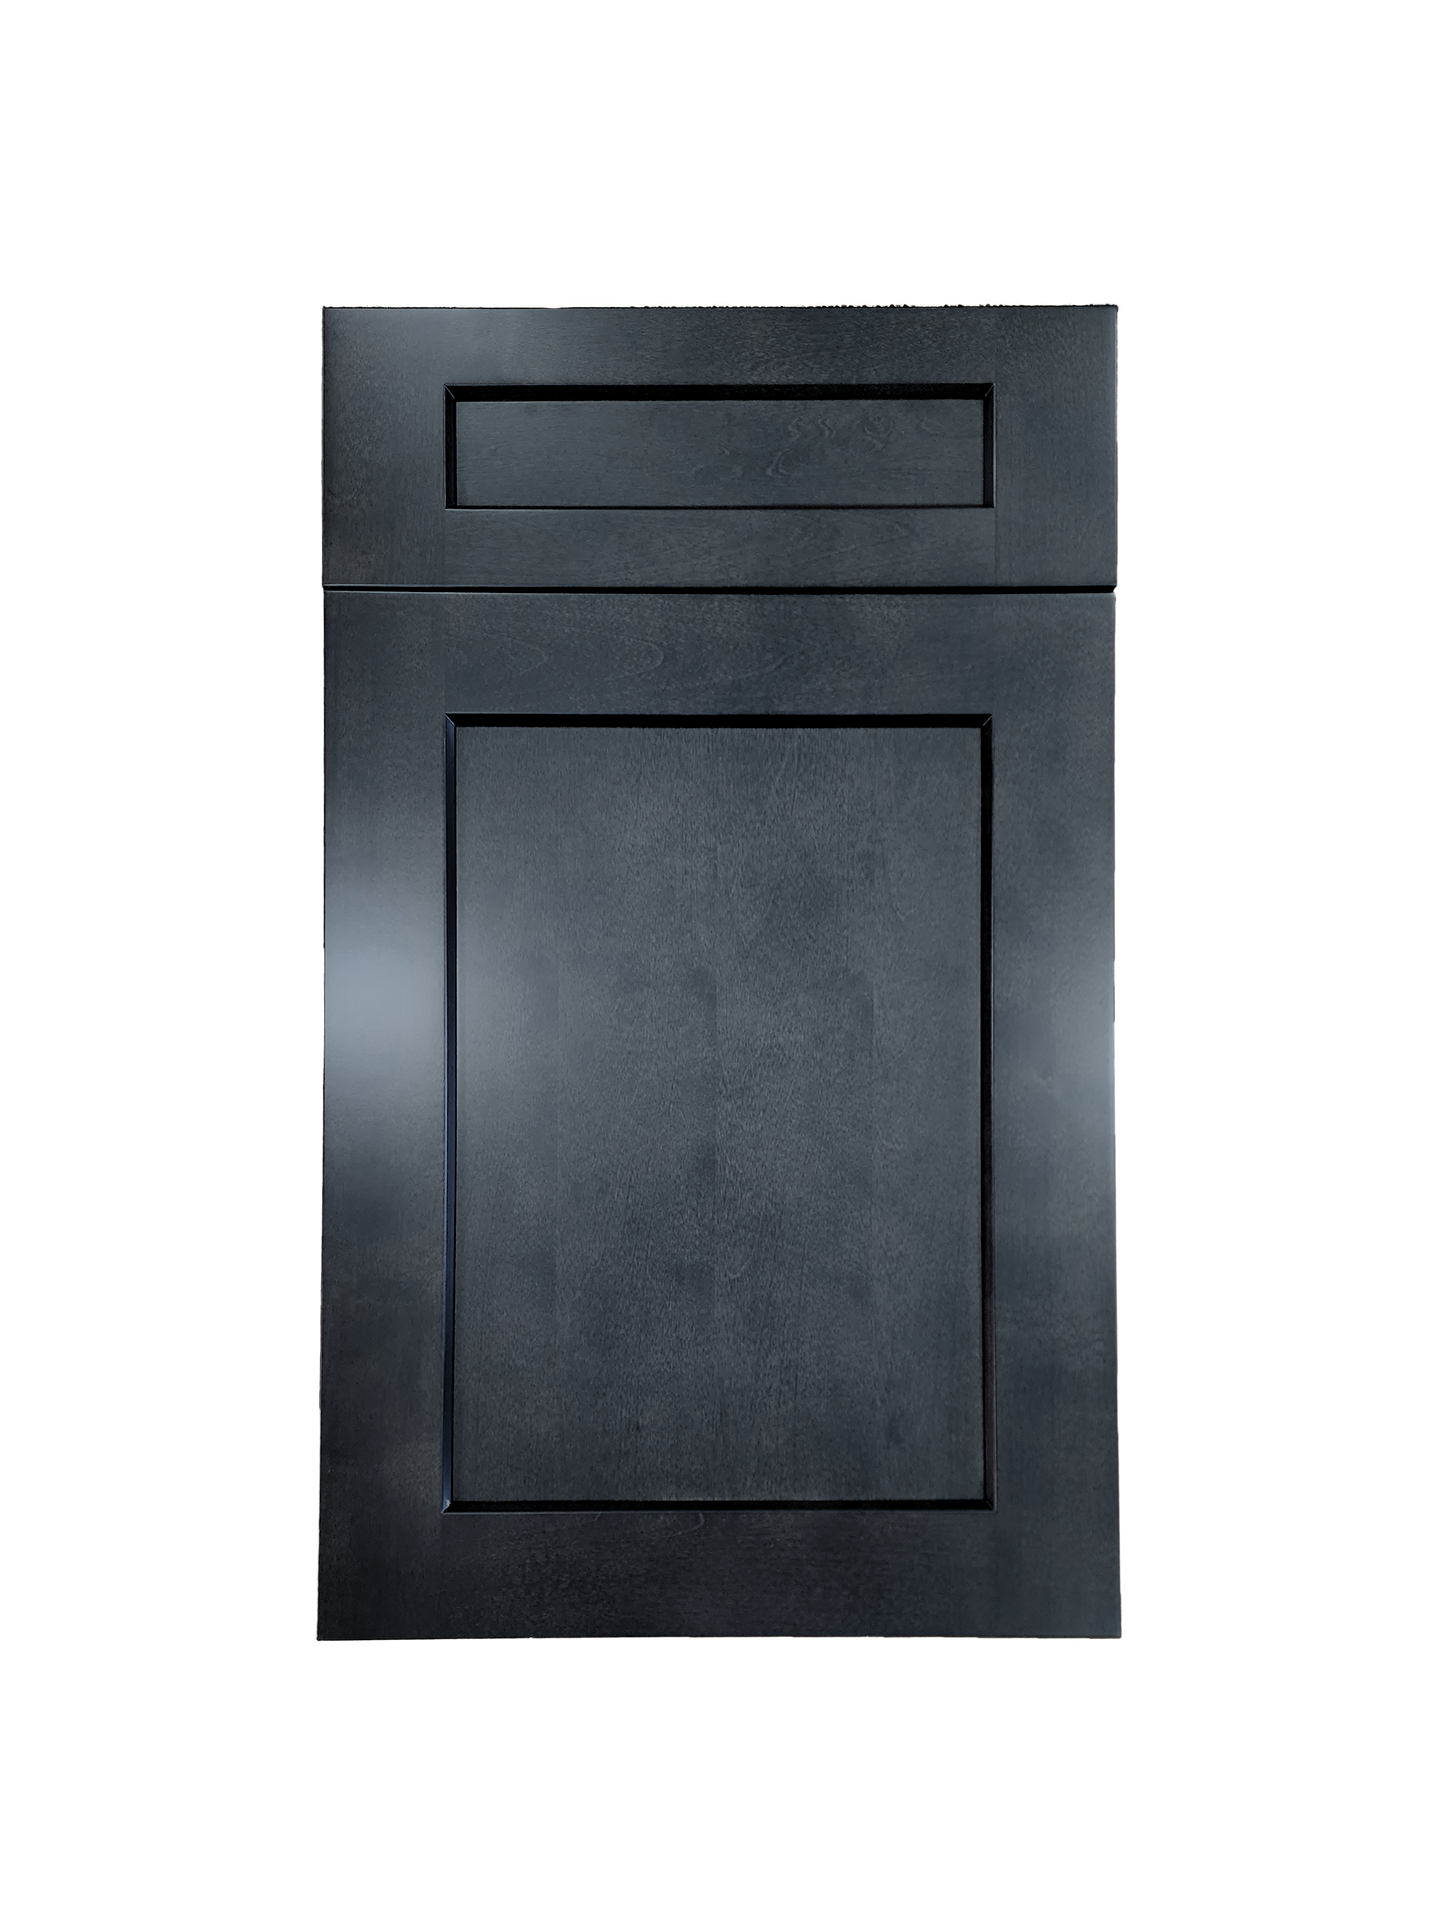 Stormy Grey Wall Cabinet 15 inches wide 12 inches deep 42 inches tall with Stormy Grey box and Stormy Grey doors